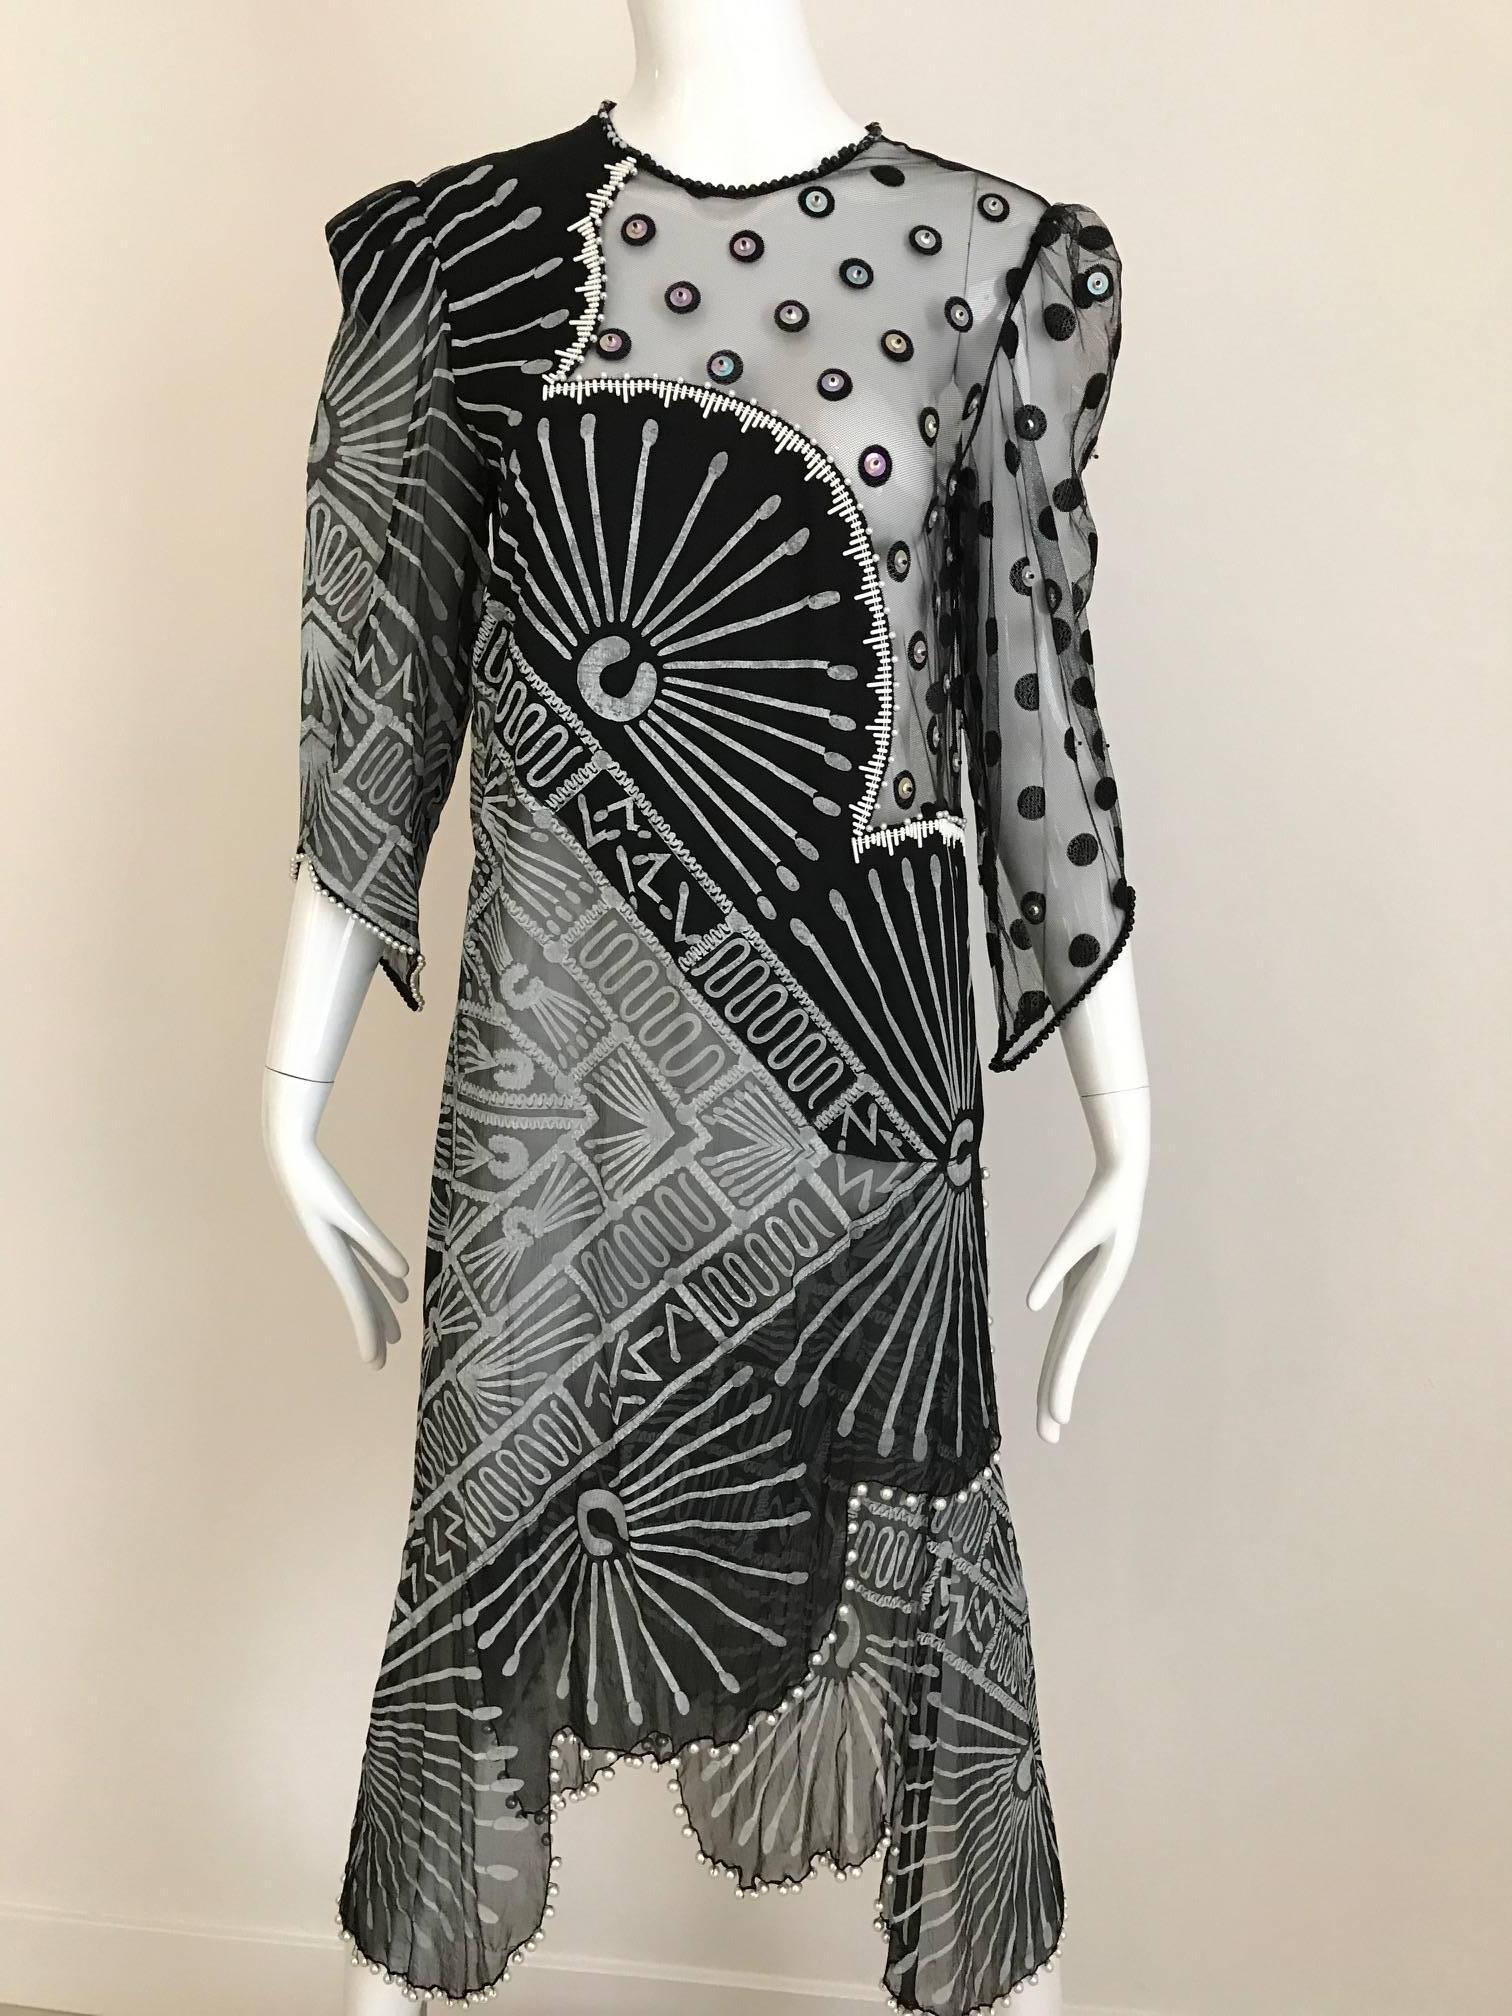 Vintage Zandra Rhodes black and grey hand painted print silk chiffon dress with sheer bodice. (for modest coverage see picture #1) #1 dress shown with black one shoulder Jersey slip (dress comes with the slip) 
Bodice part has black velvet circle